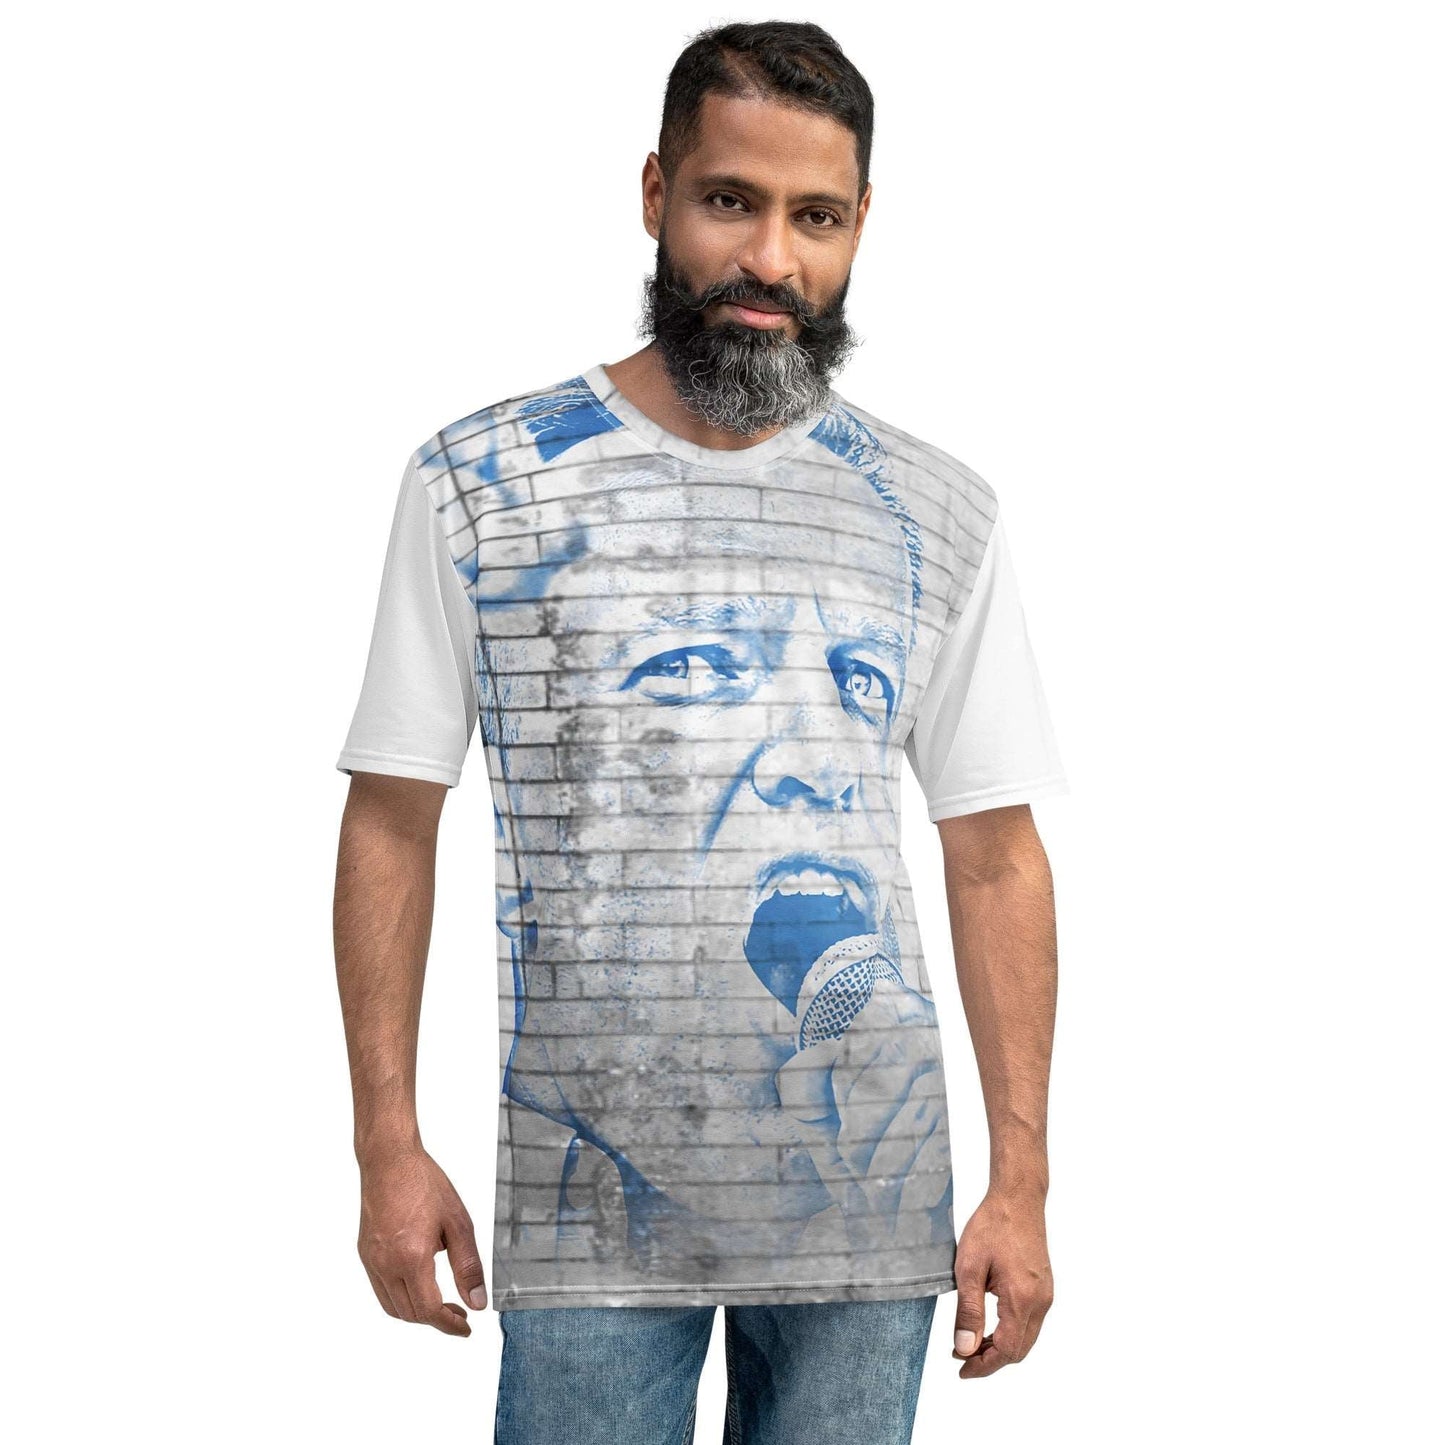 Alexei Navalny All-Over Print Men's Crew Neck T-Shirt - Souled Out World